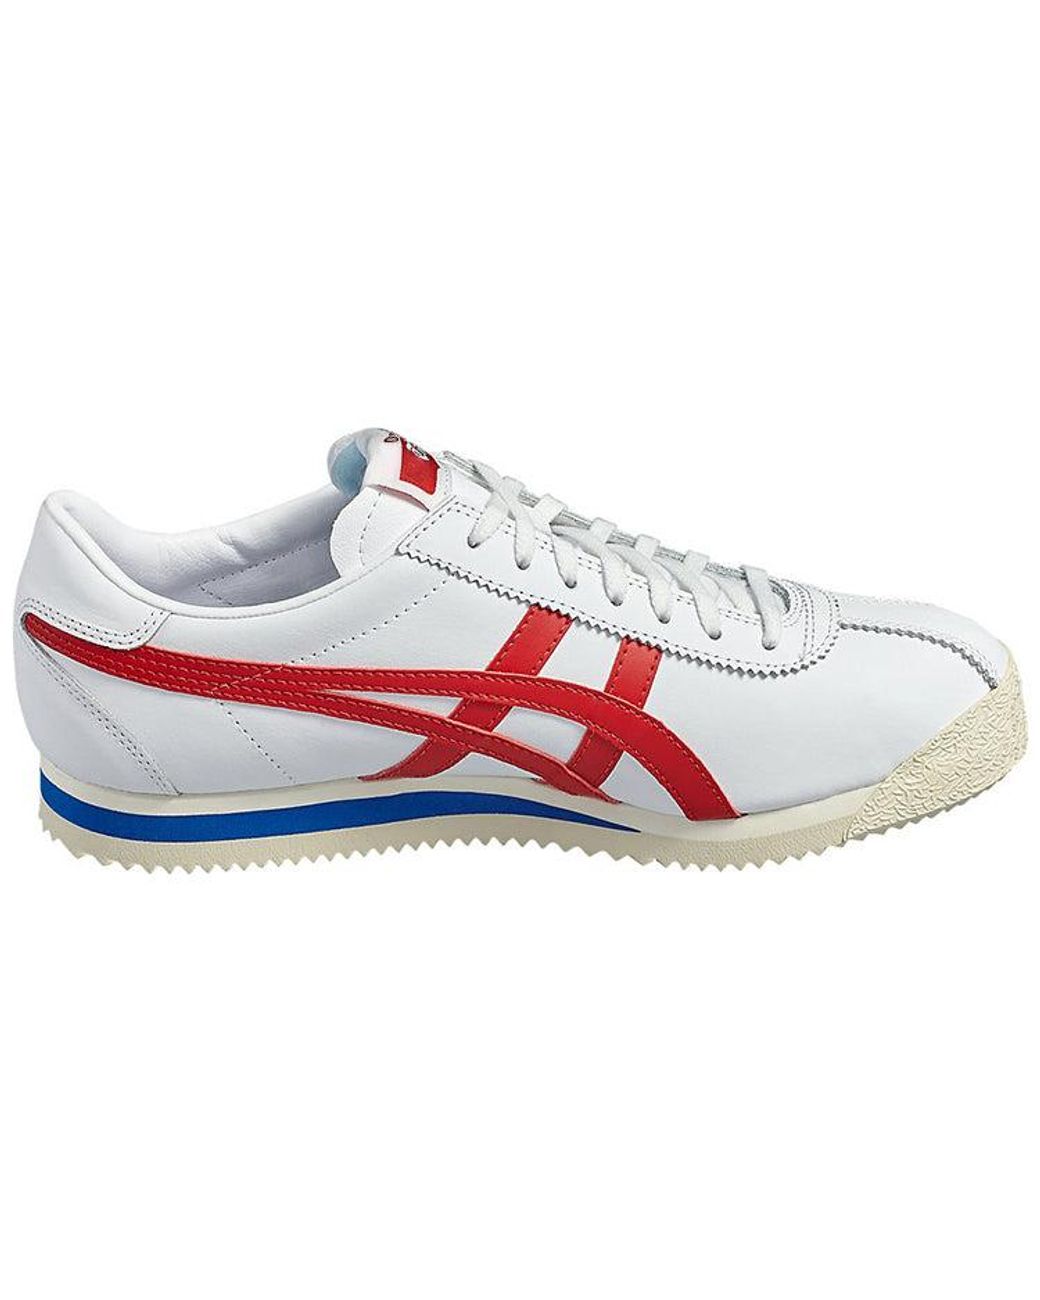 Onitsuka Tiger Corsair Classic Fashion Casual Shoes/sneakers White Red |  Lyst